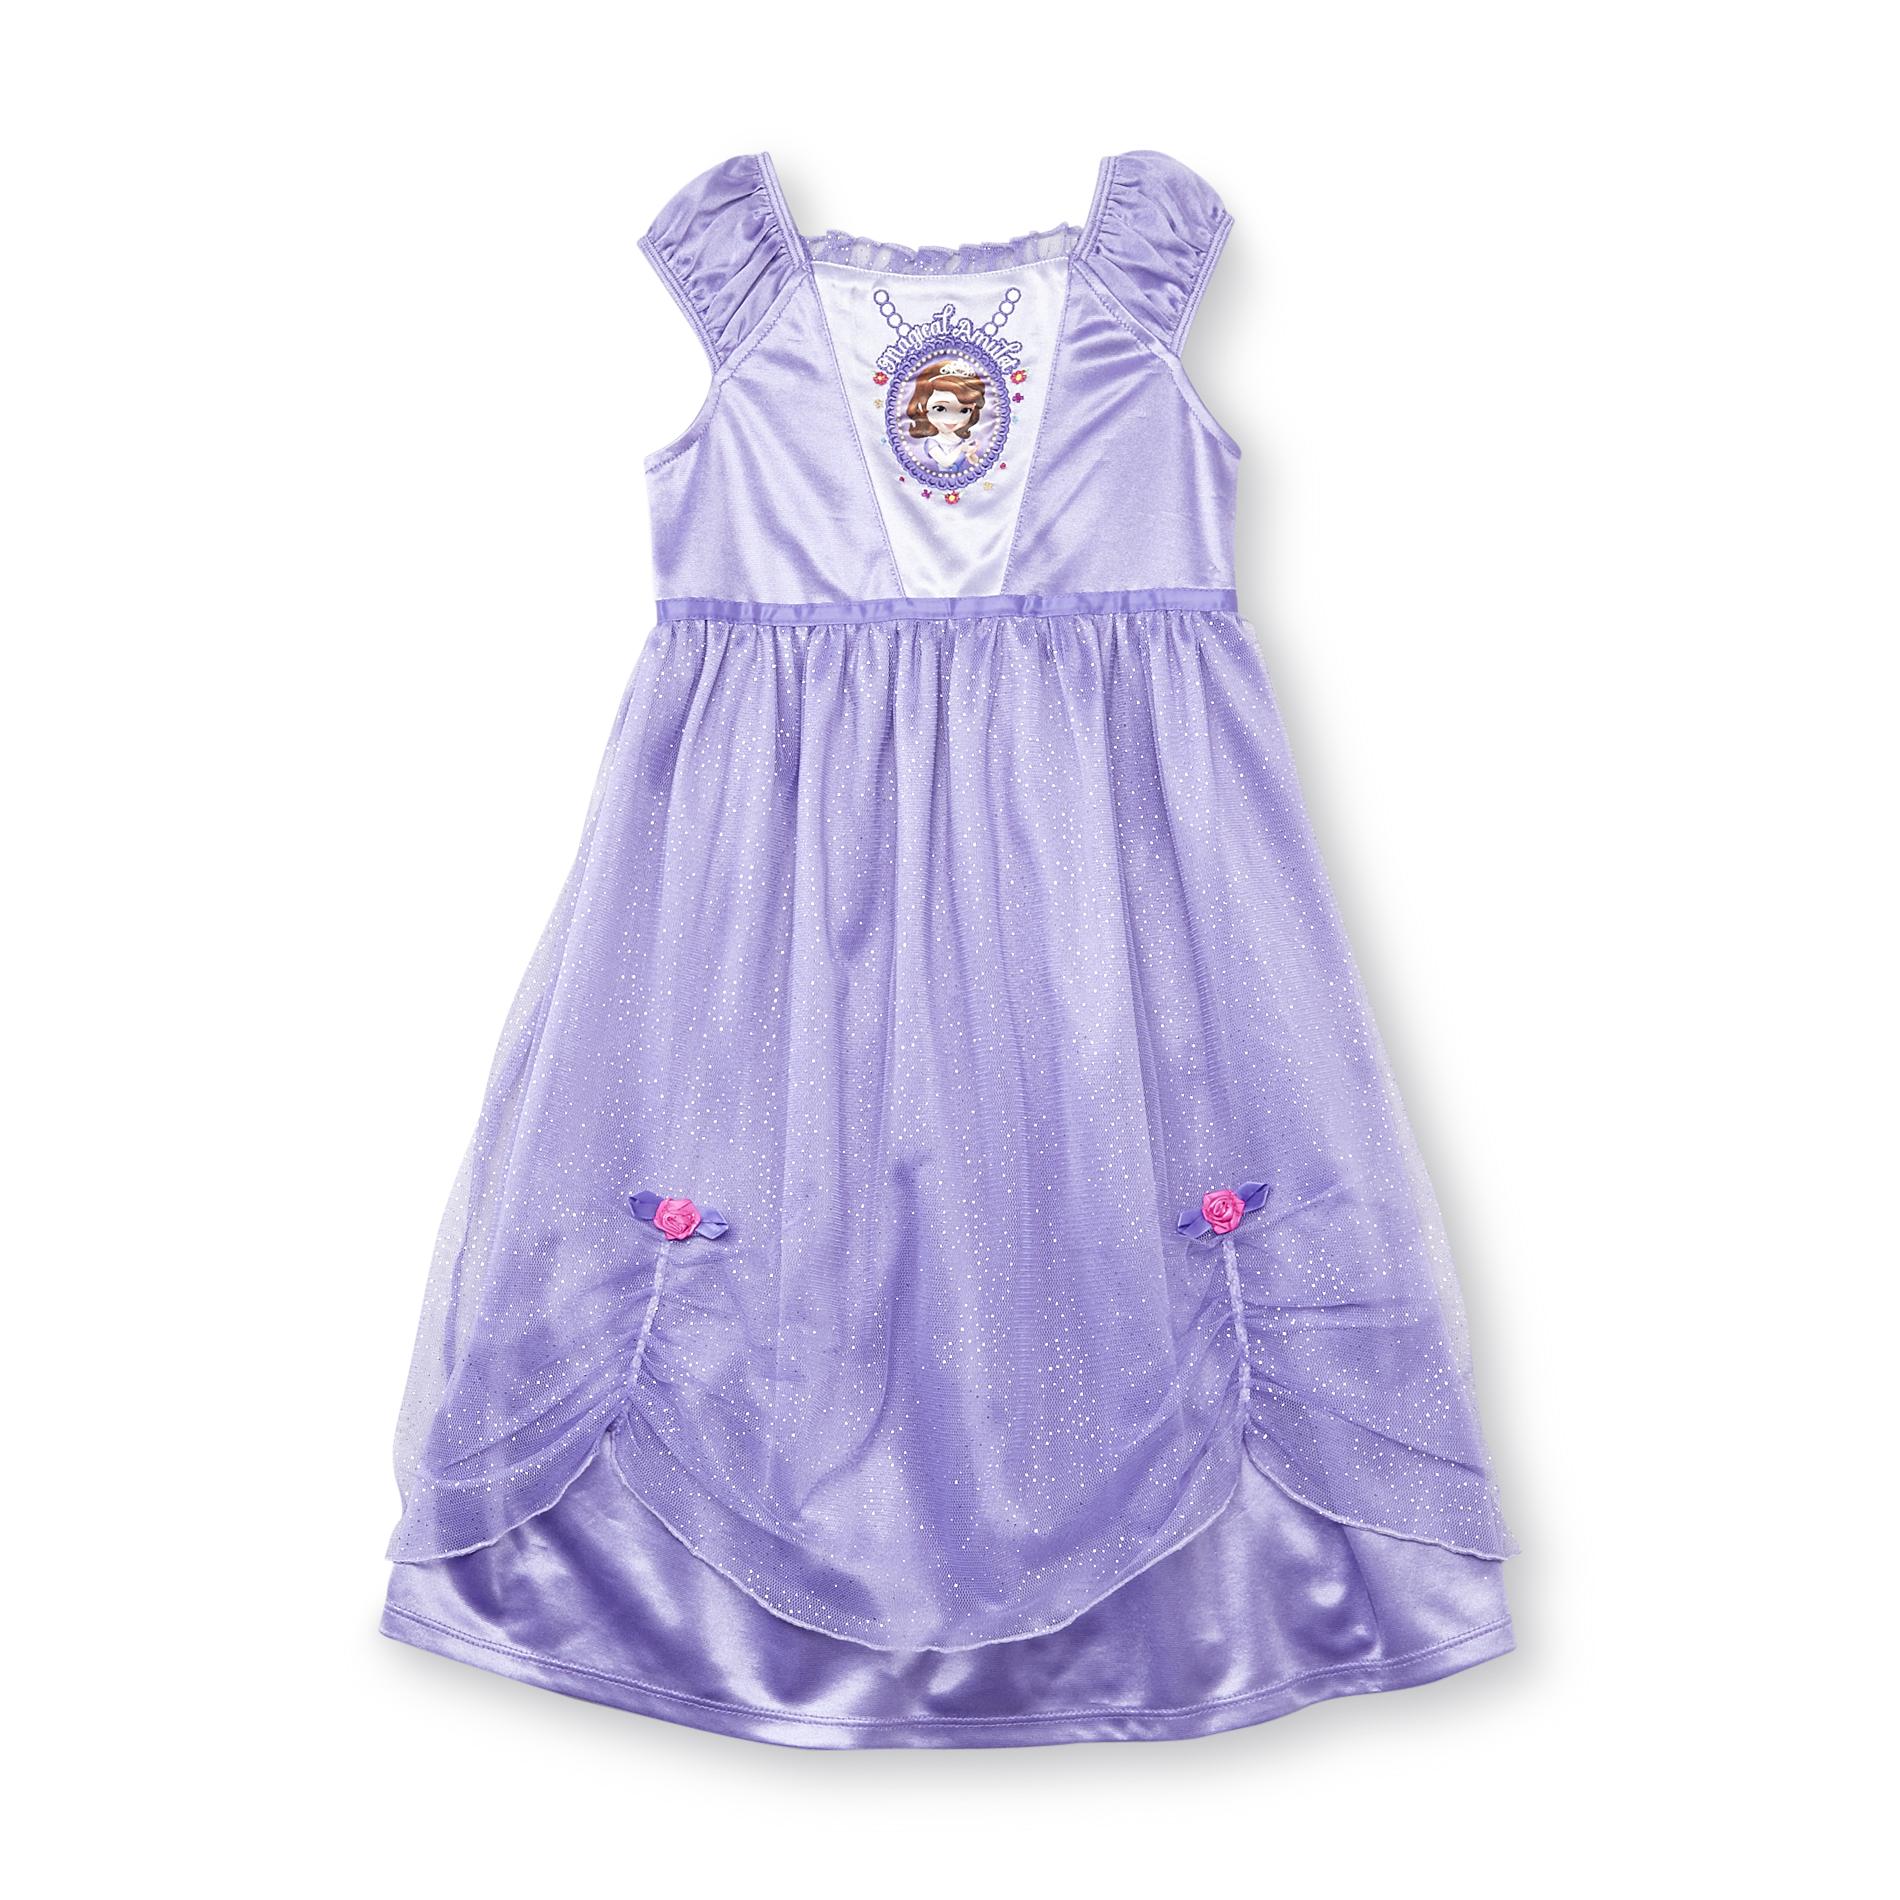 Disney Toddler Girl's Nightgown - Sofia the First